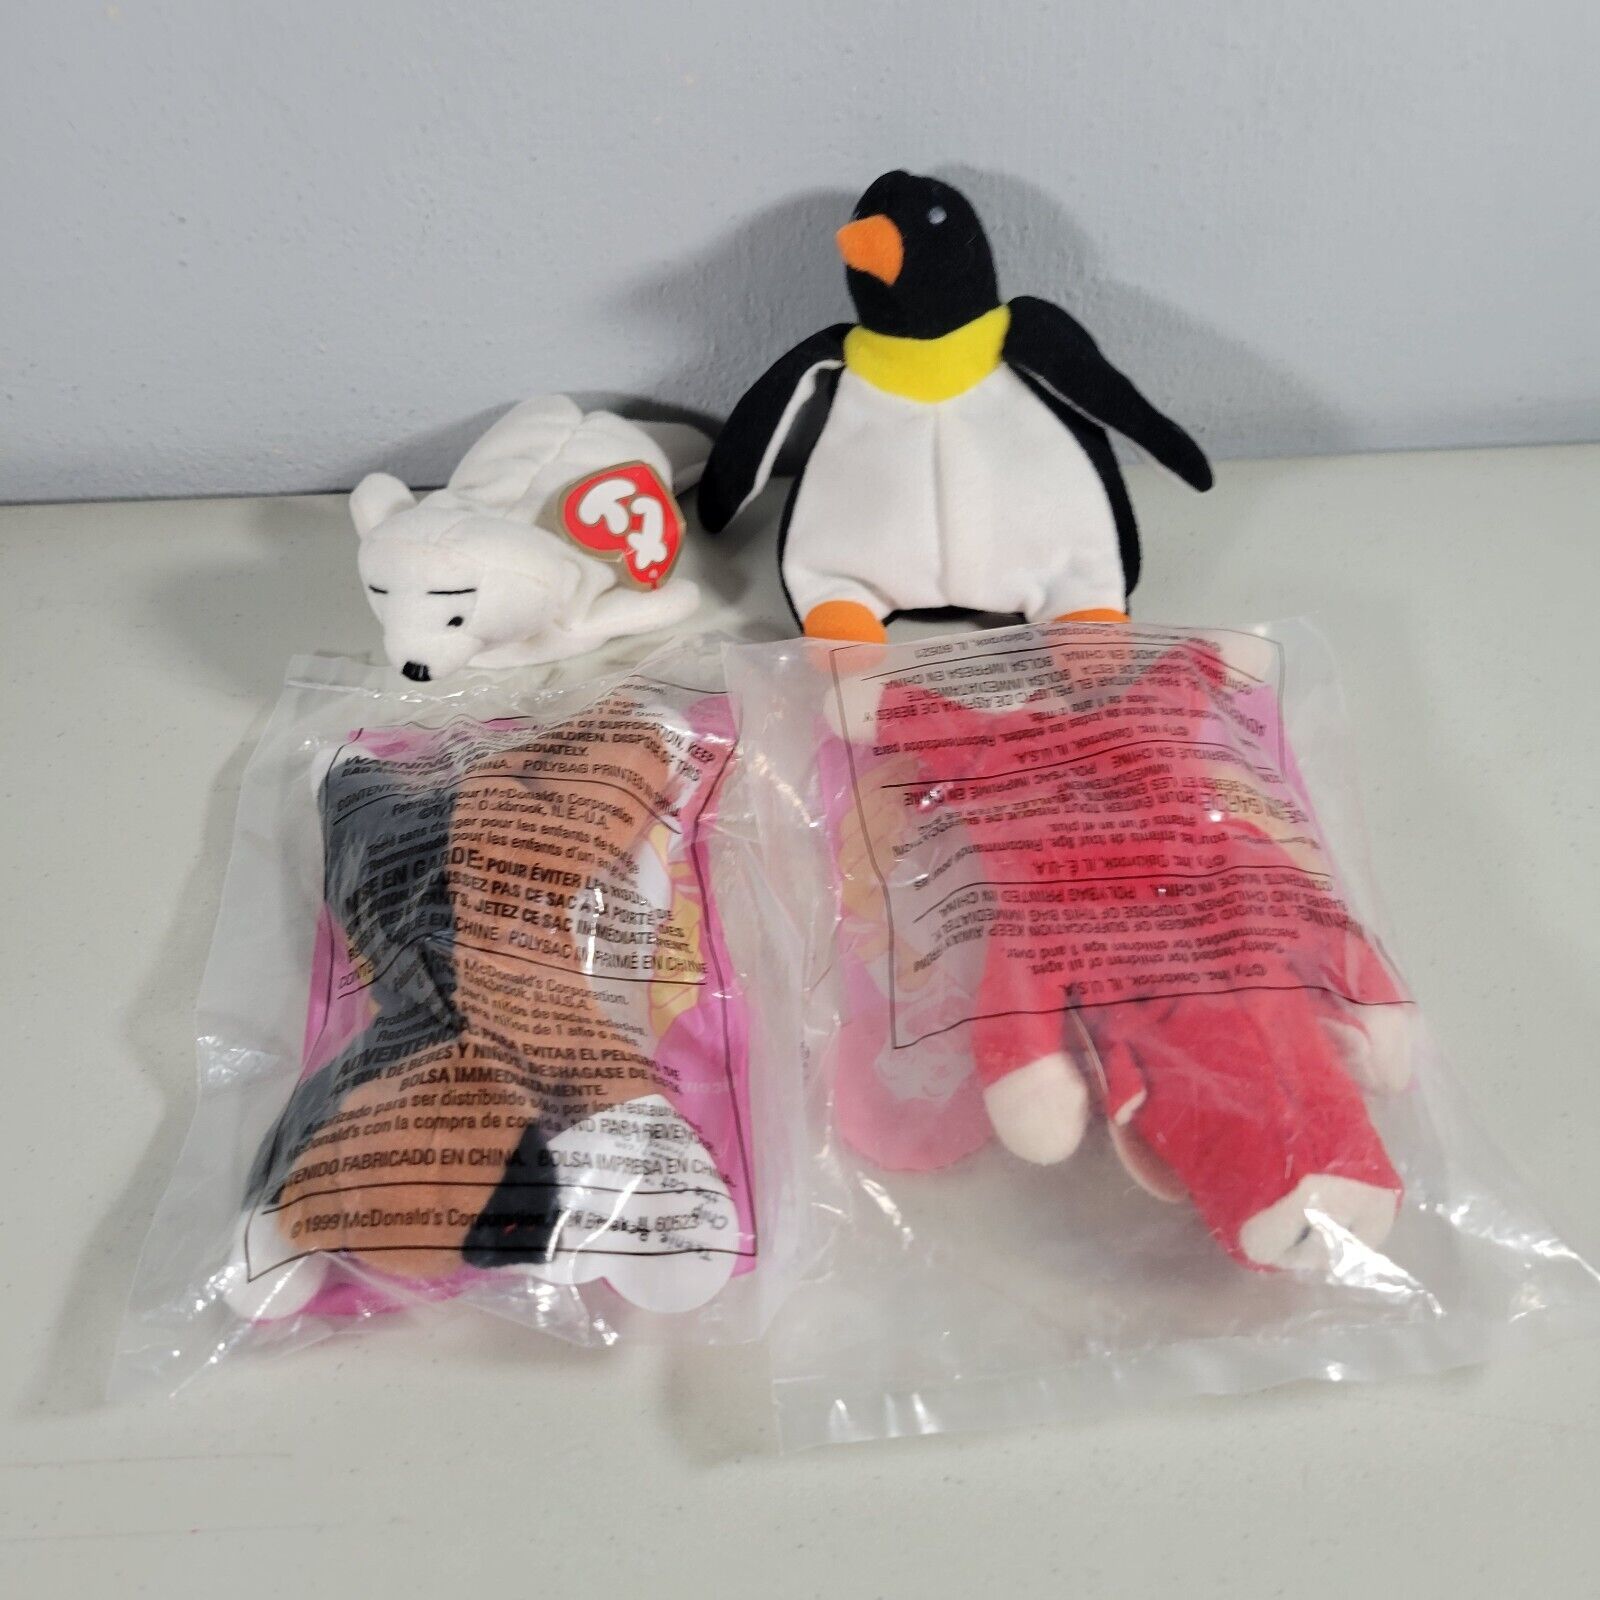 TY Teenie Beanie Babies Lot of 4 Cat Penguin Snort Seal New and Used - $11.69